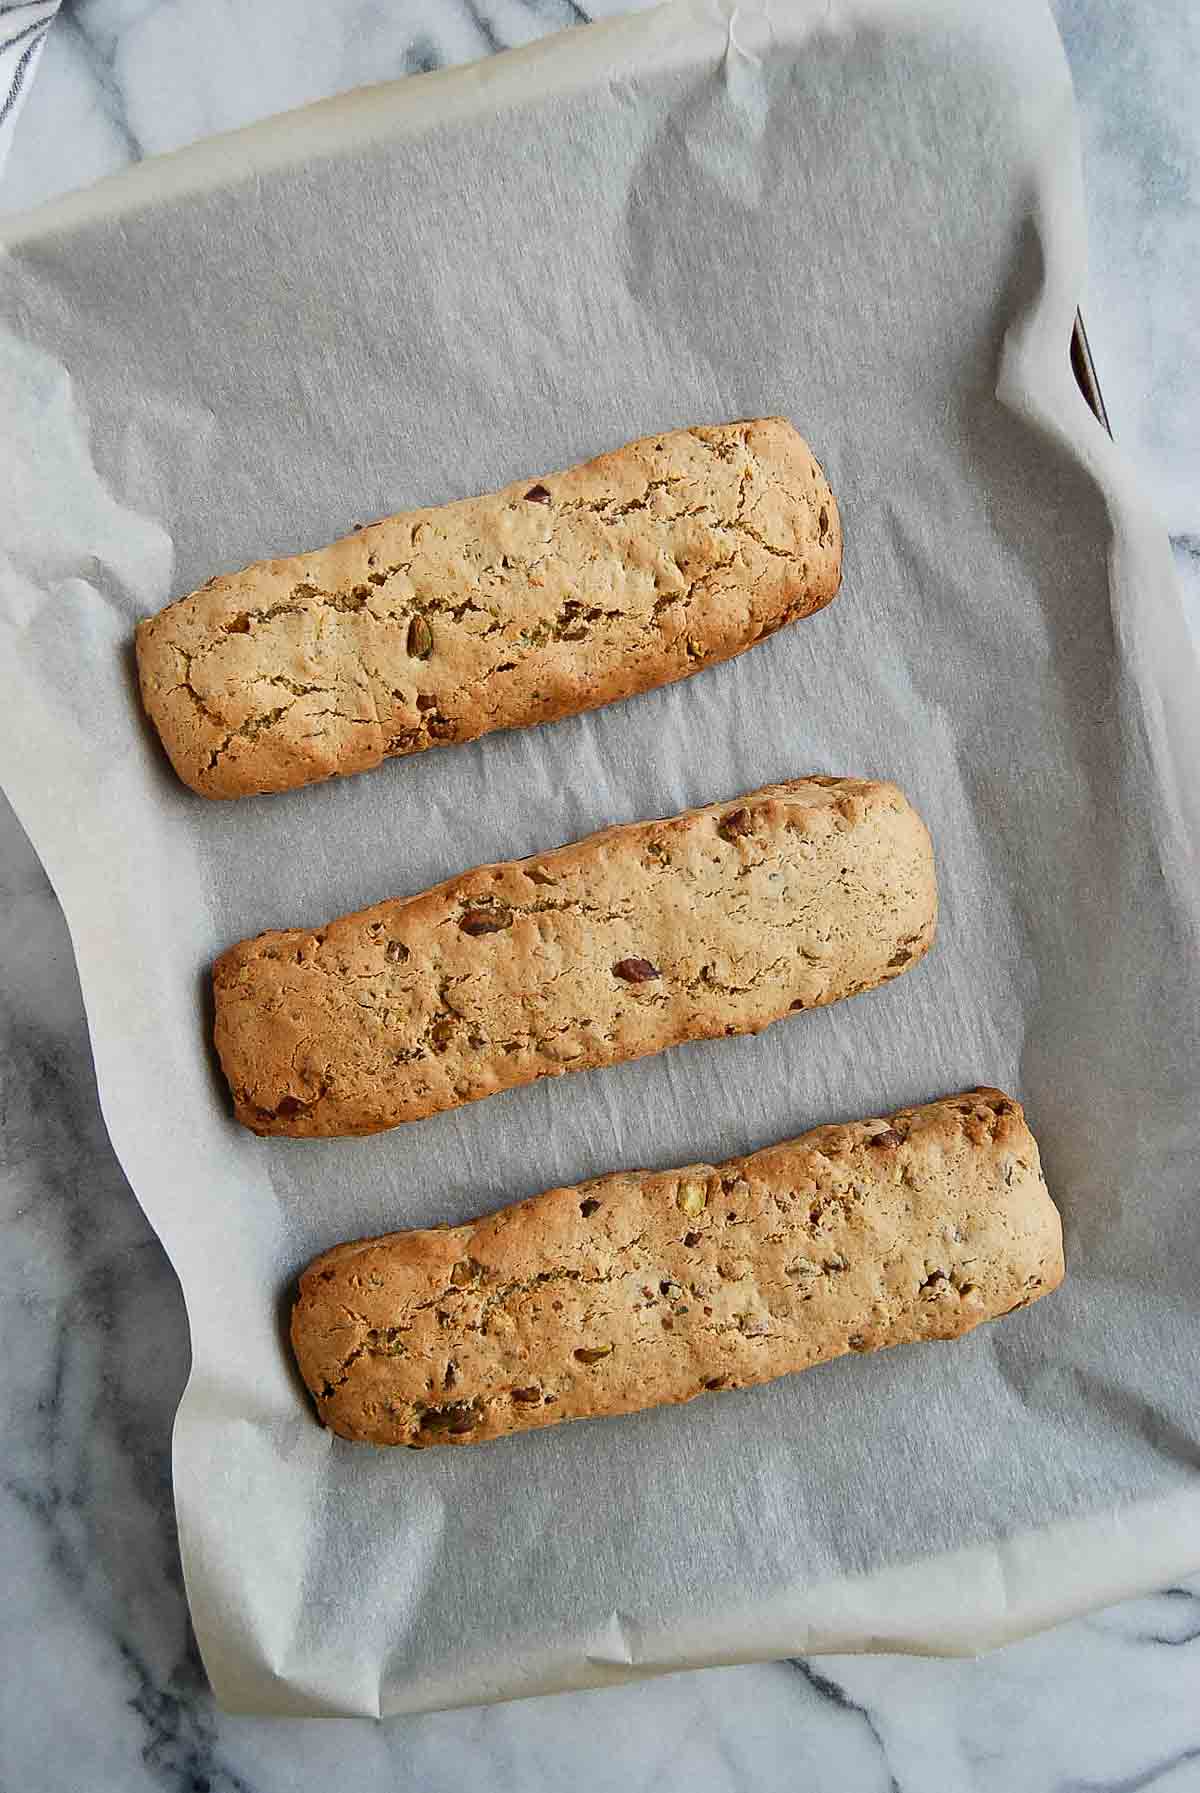 baked lemon biscotti loaves with pistachios.